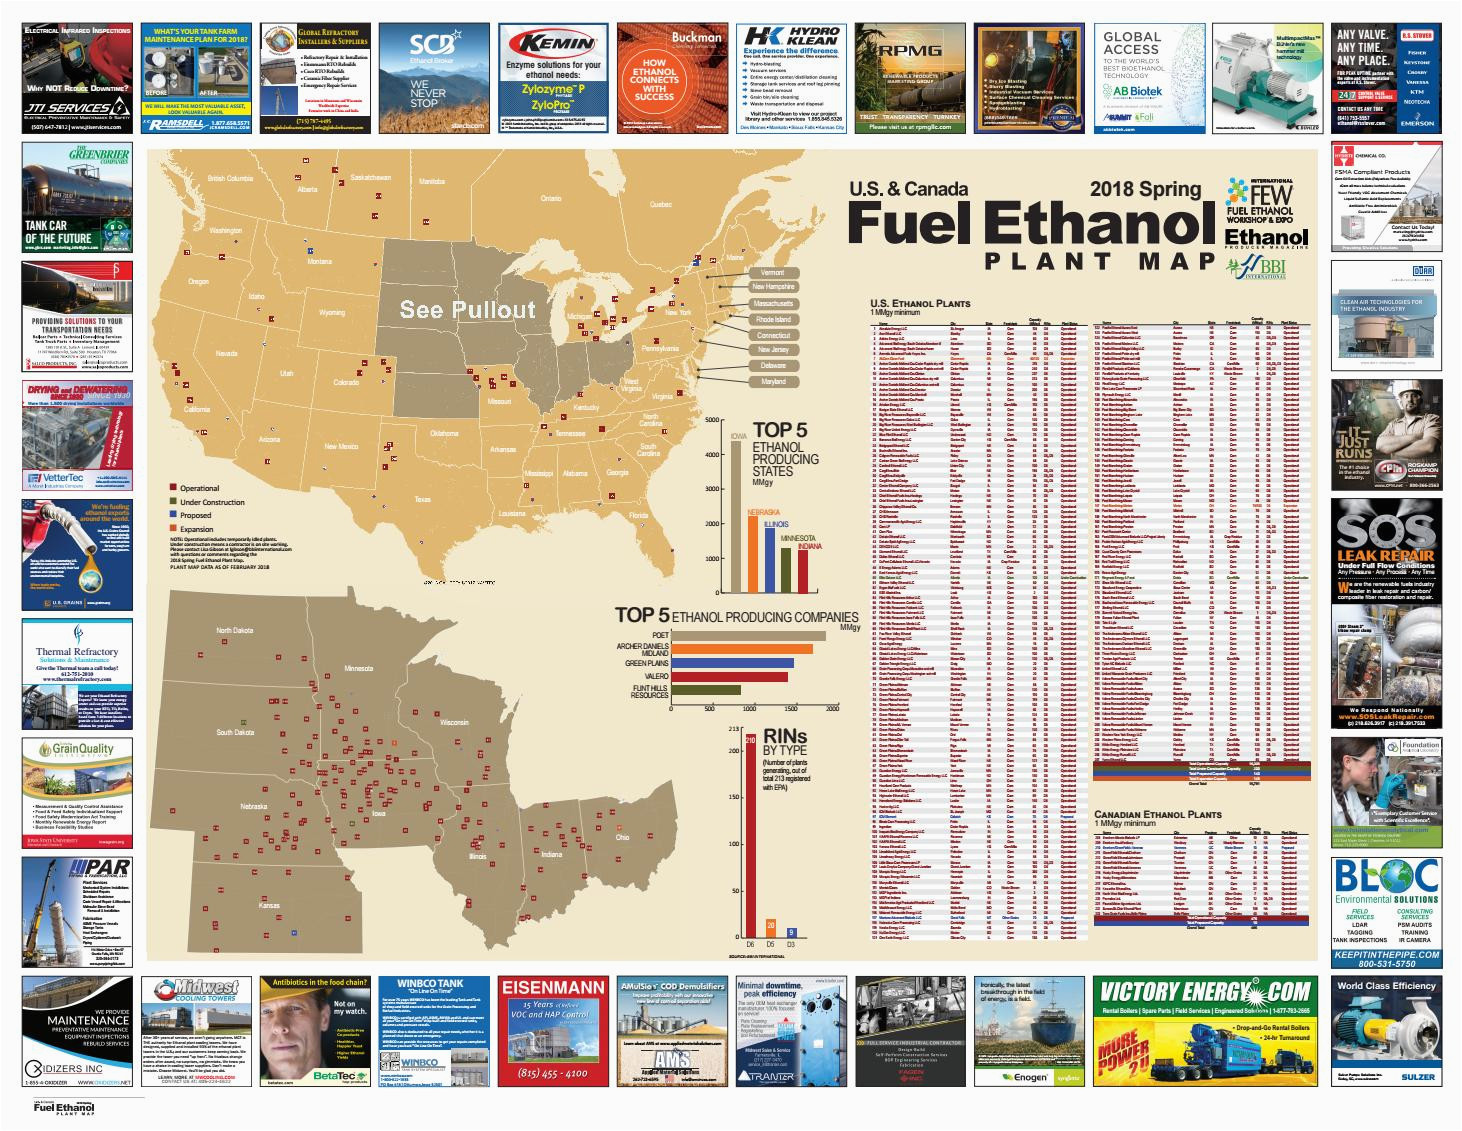 Texas Crops Map Spring 2018 U S and Canada Fuel Ethanol Plant Map by Bbi